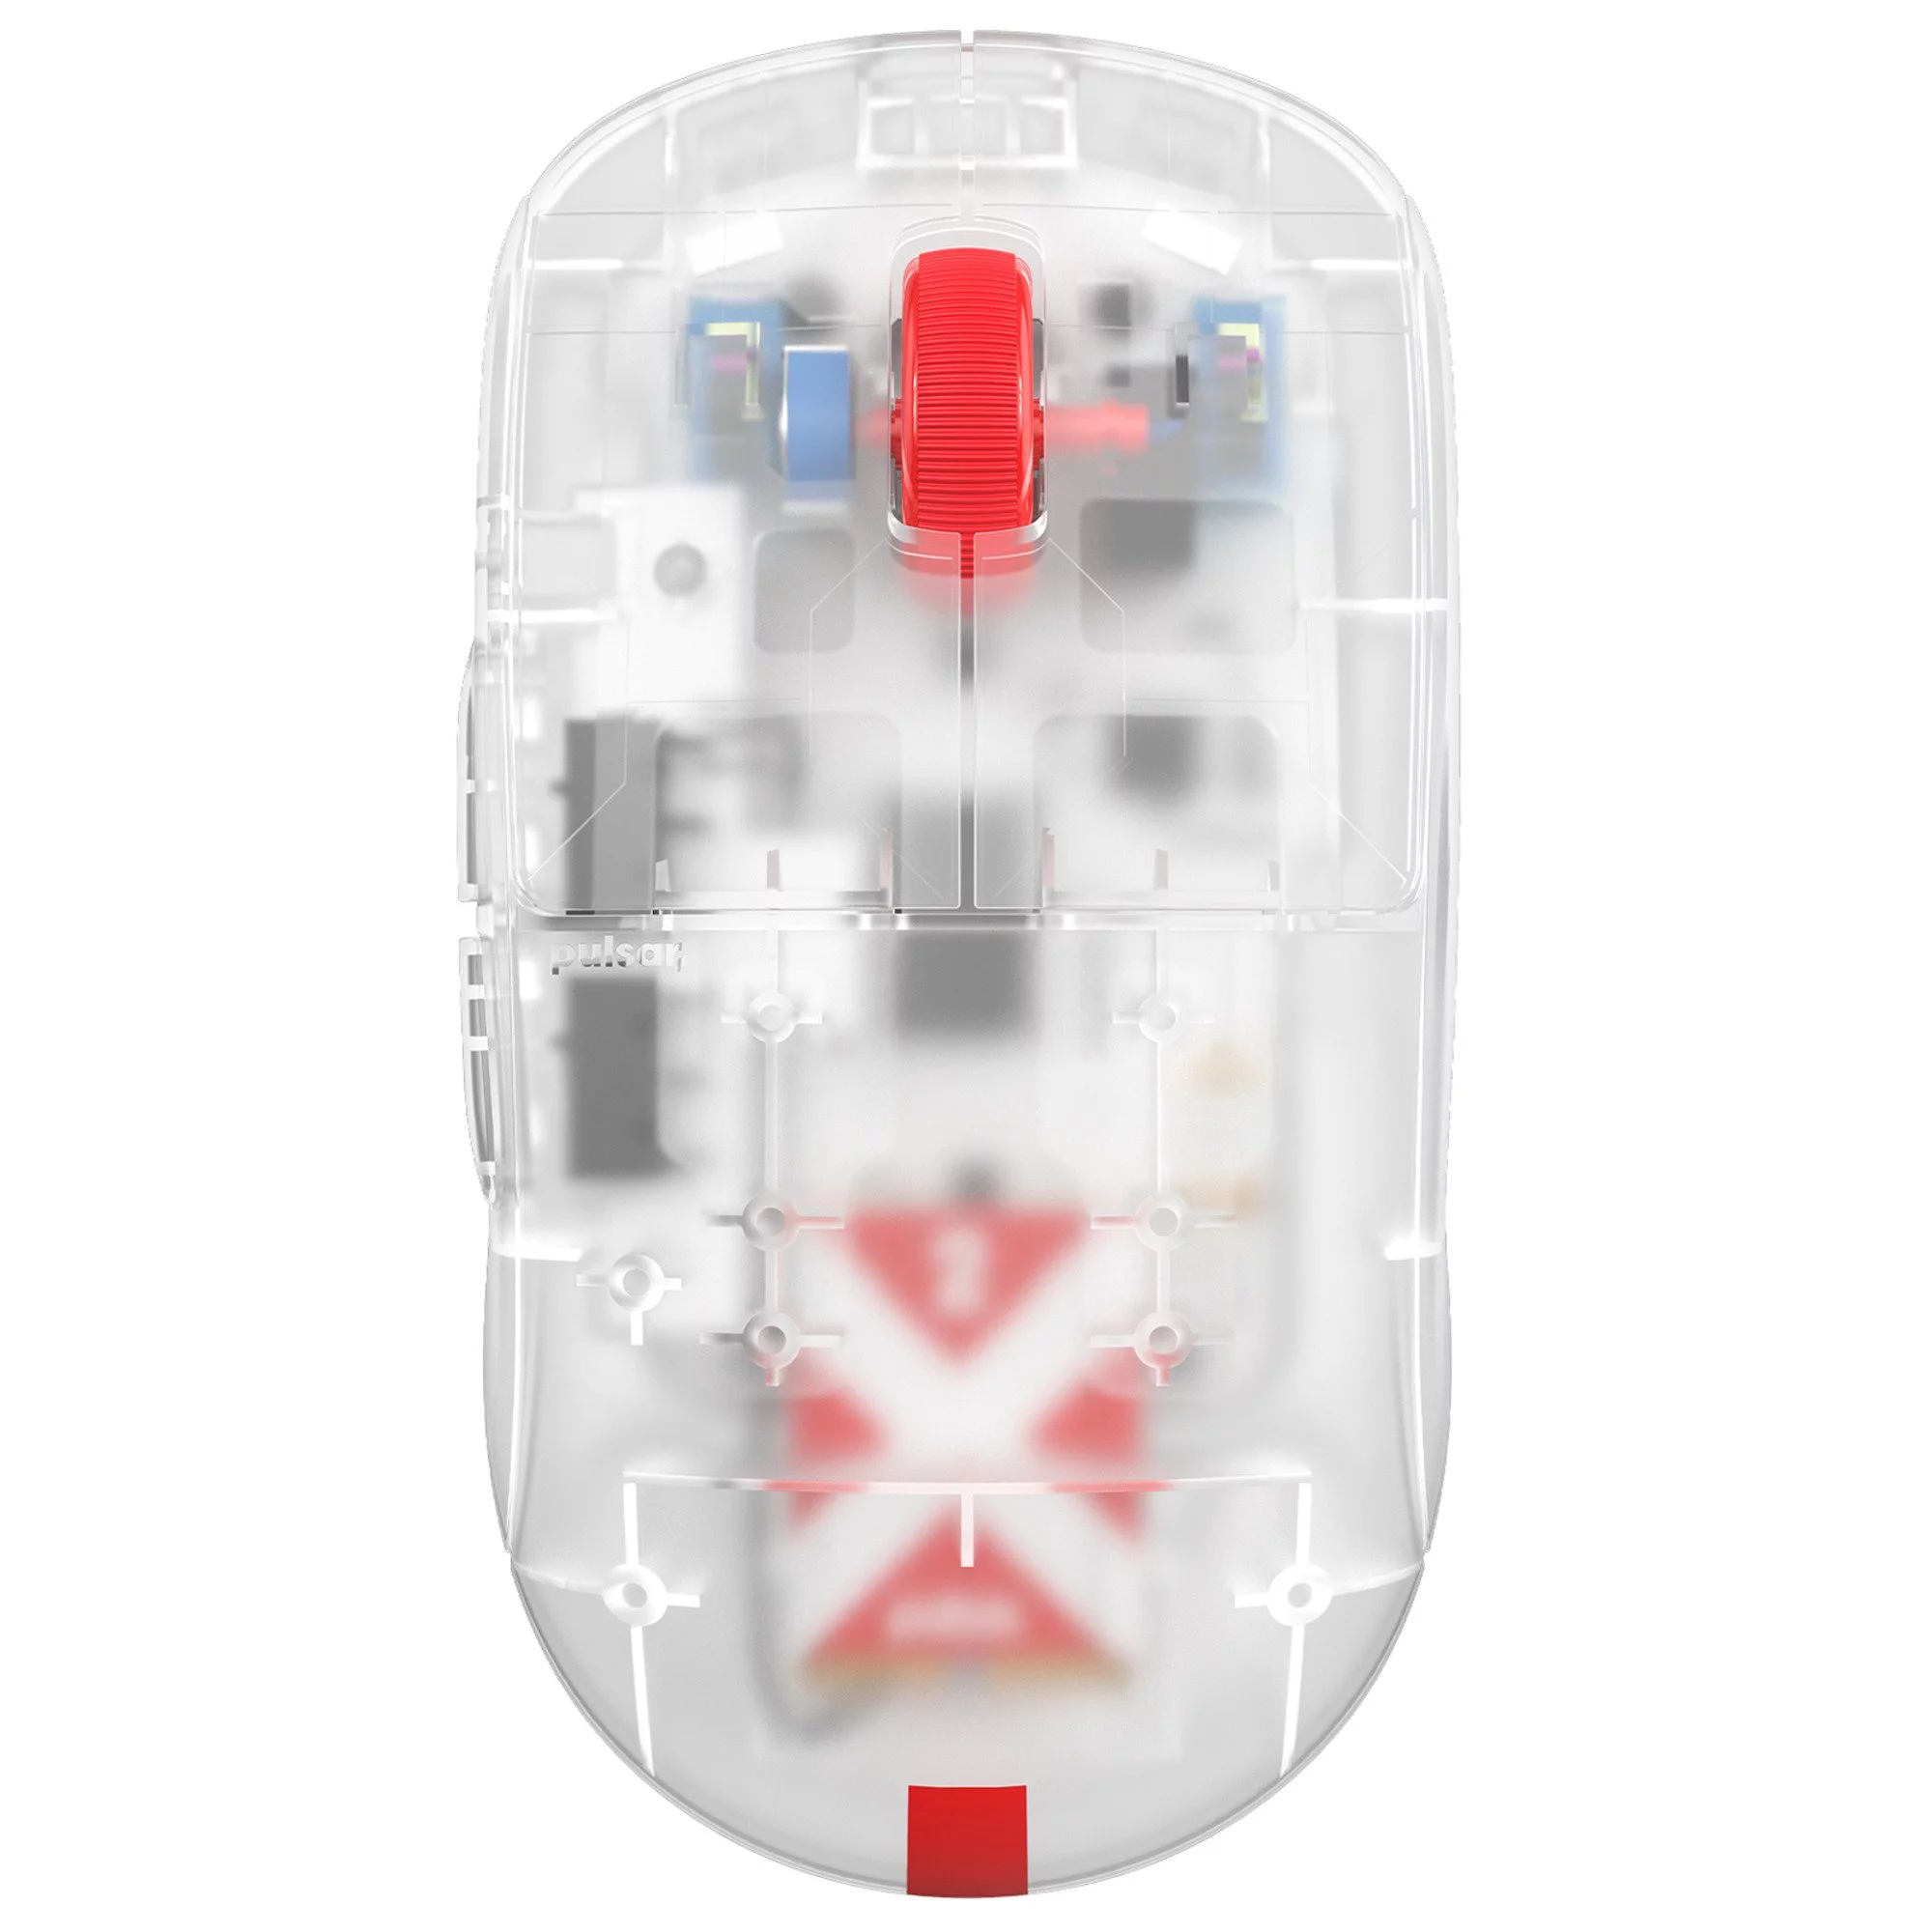 Pulsar X2 Mini - Wireless Gaming Mouse [Super Clear Edition]